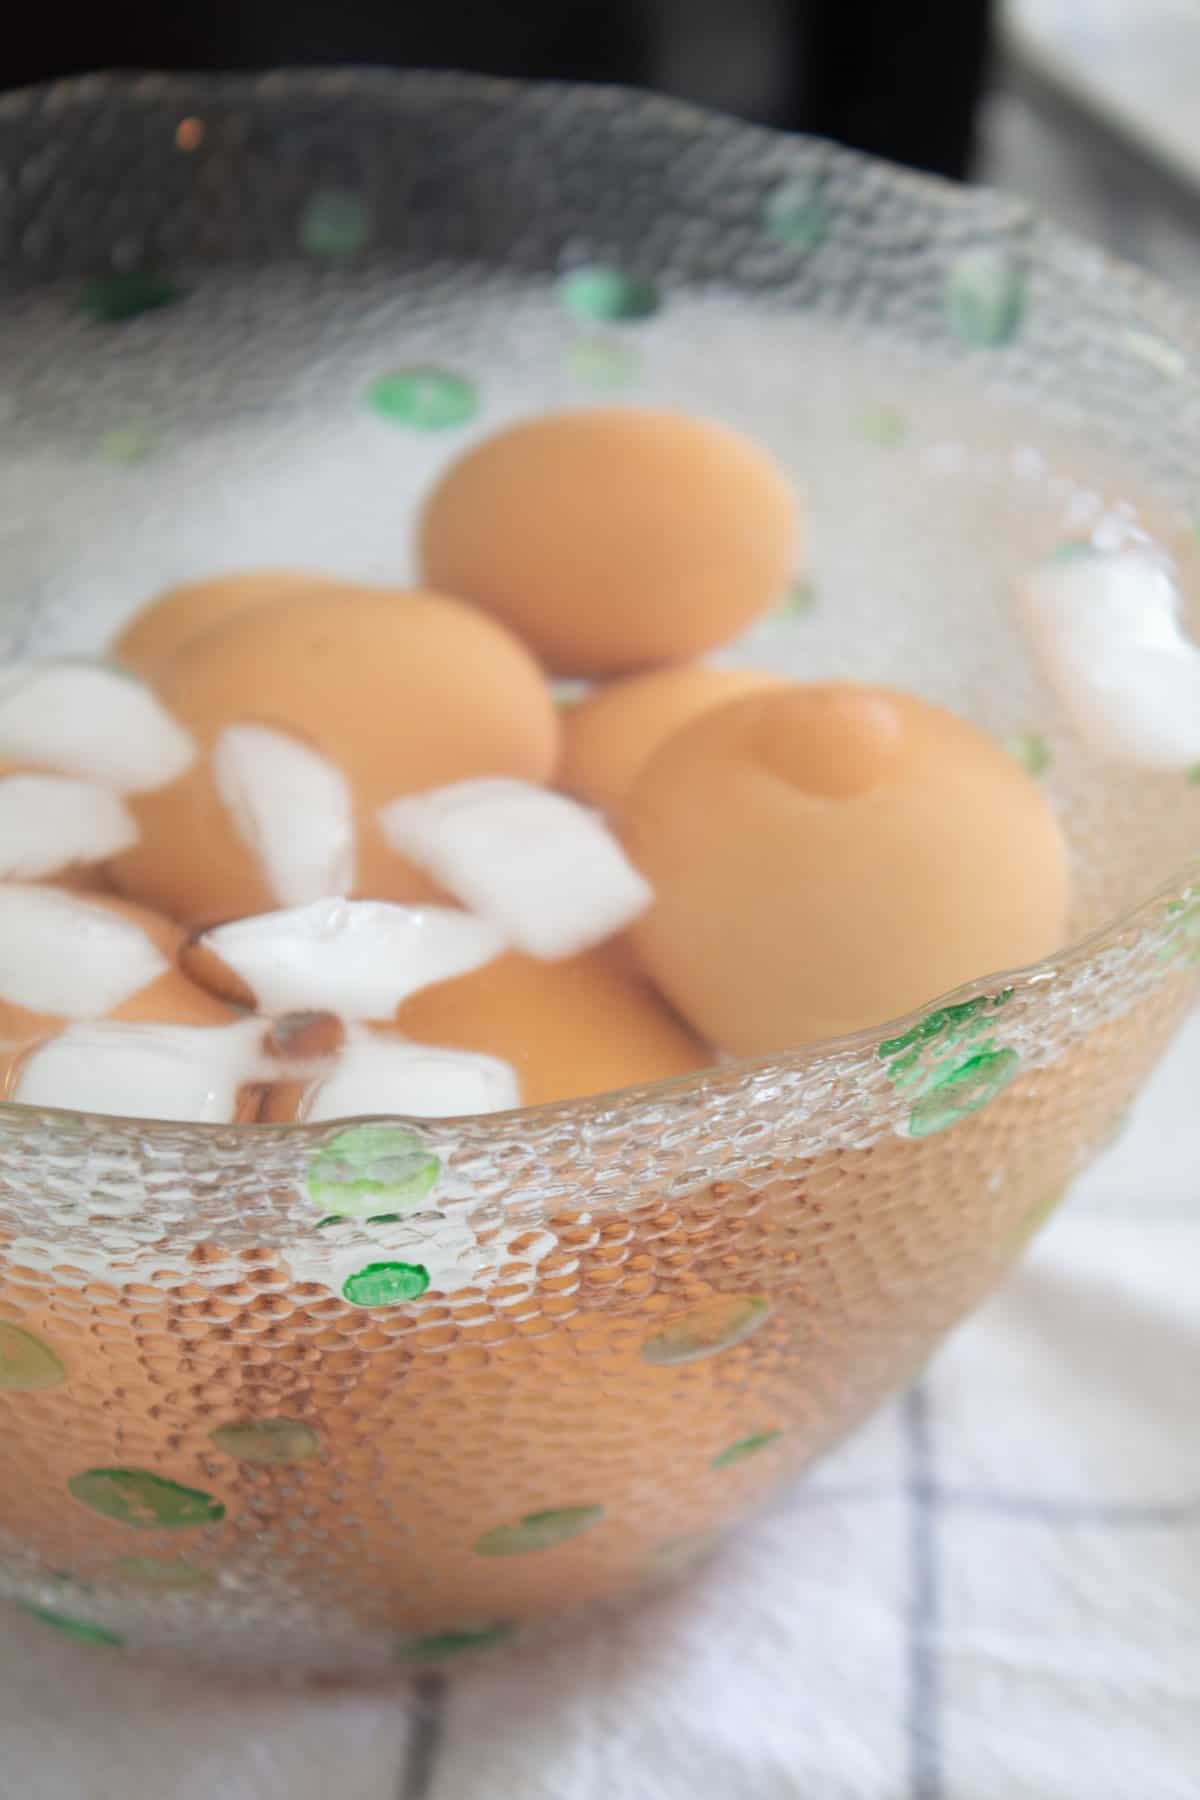 cooling hard boiled brown eggs in ice bath